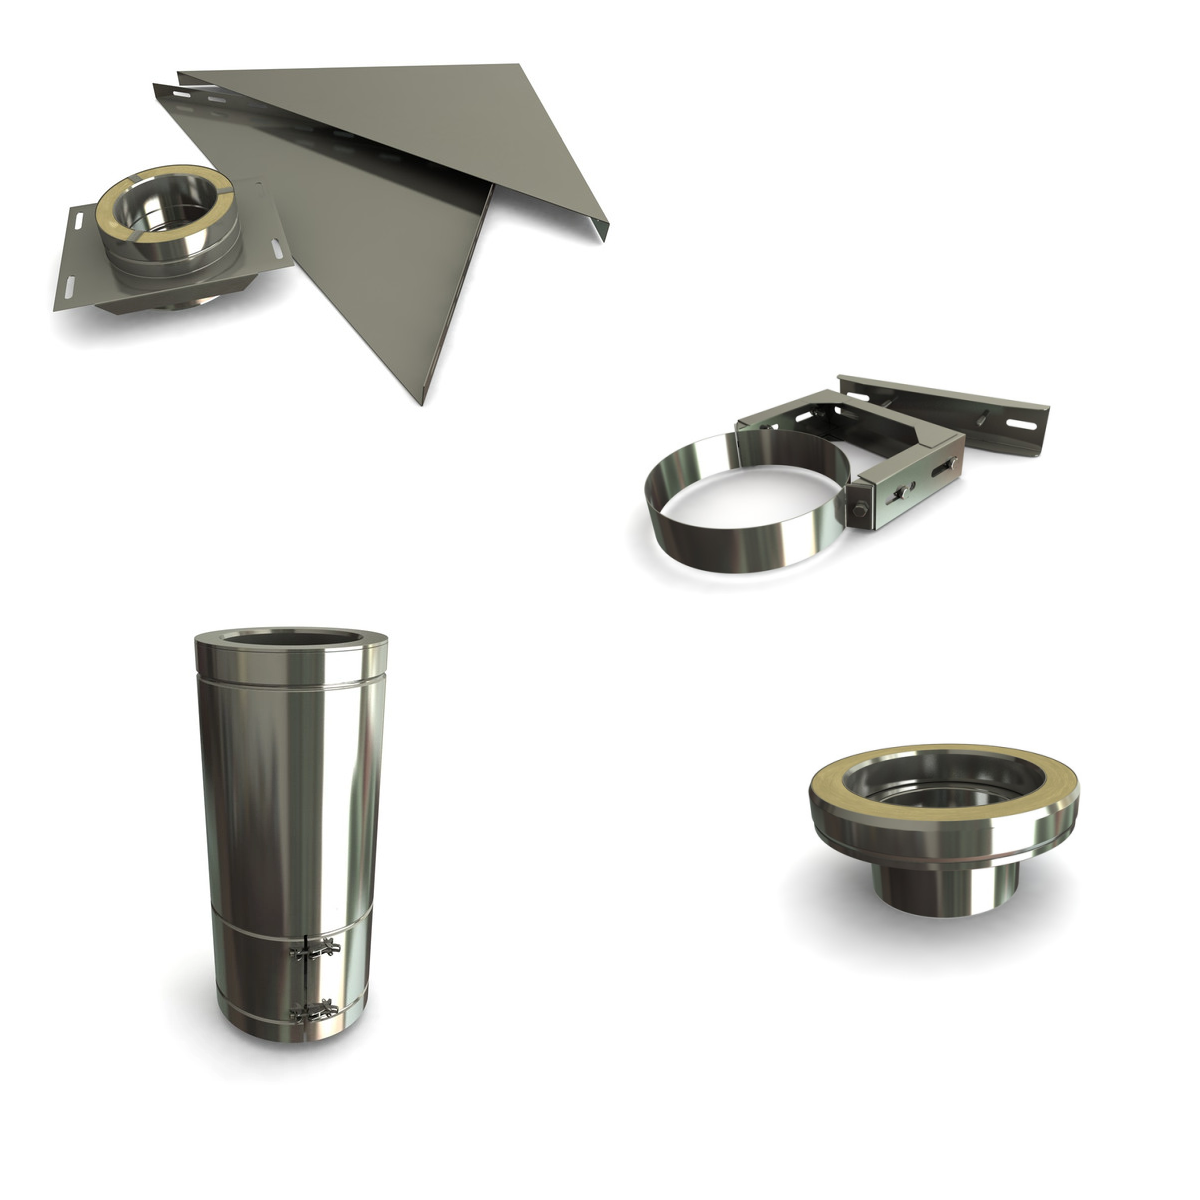 Individual twin wall flue components